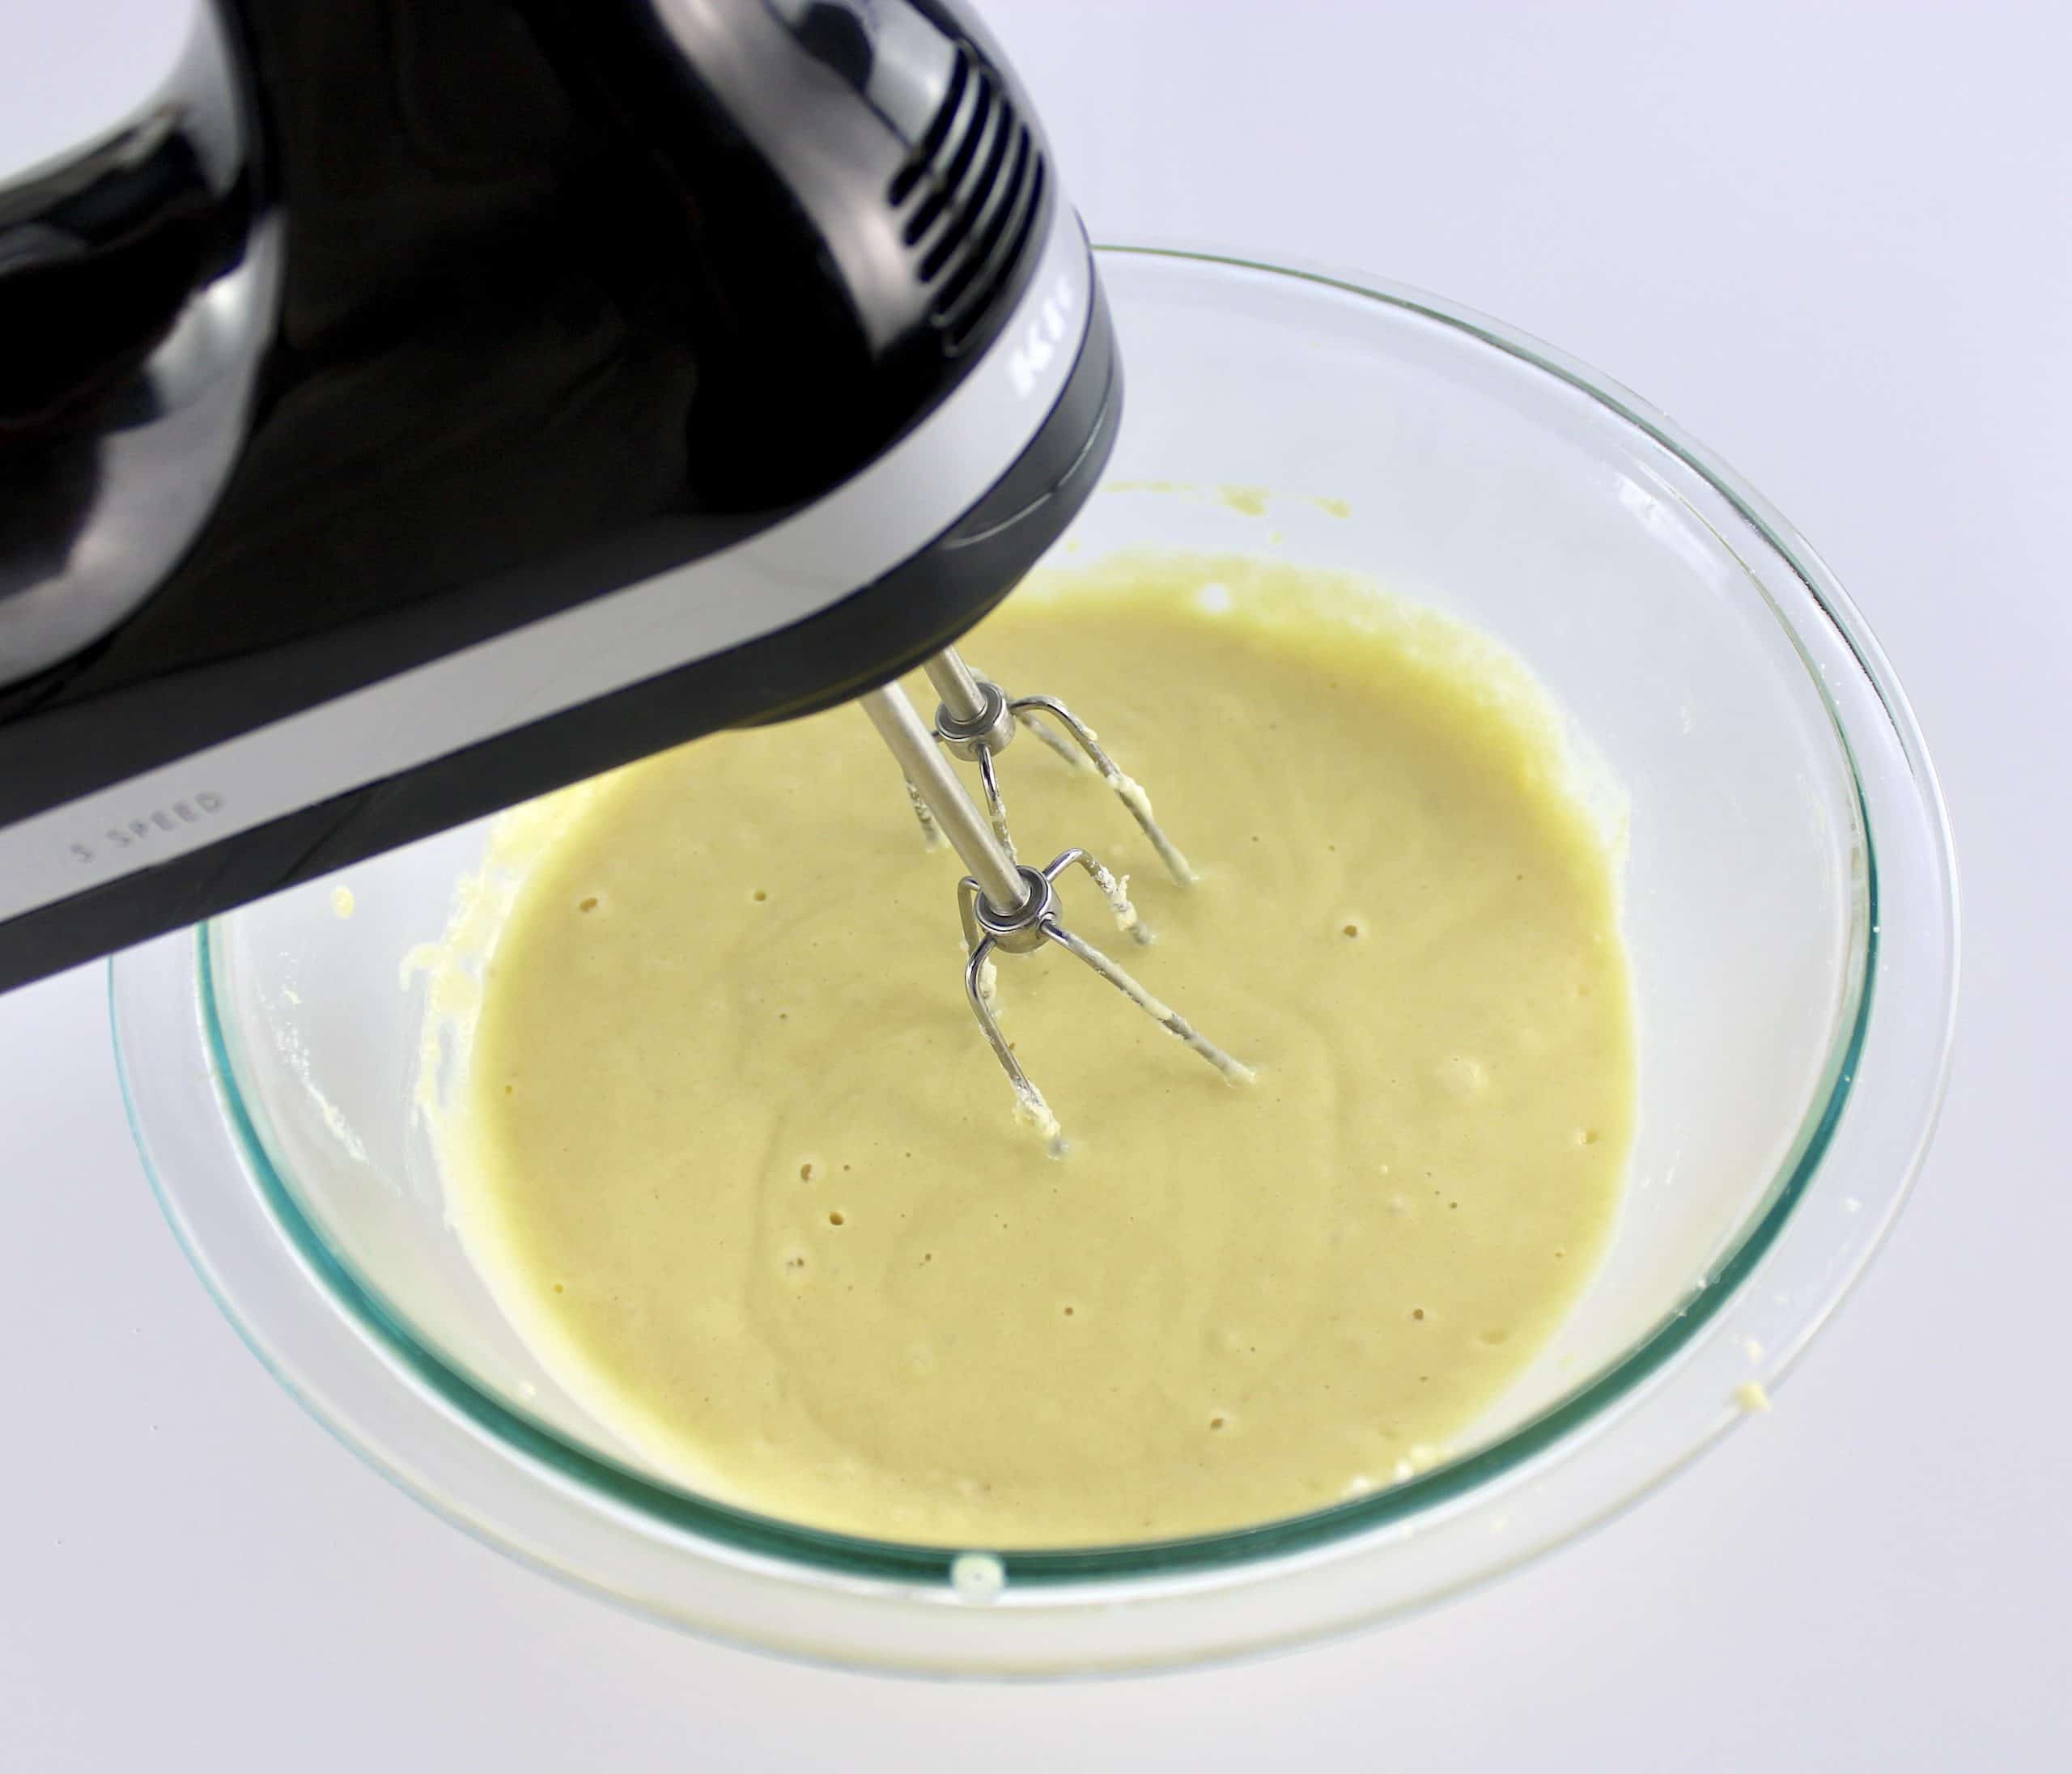 keto buttermilk pancake batter being mixed with hand mixer in glass bowl